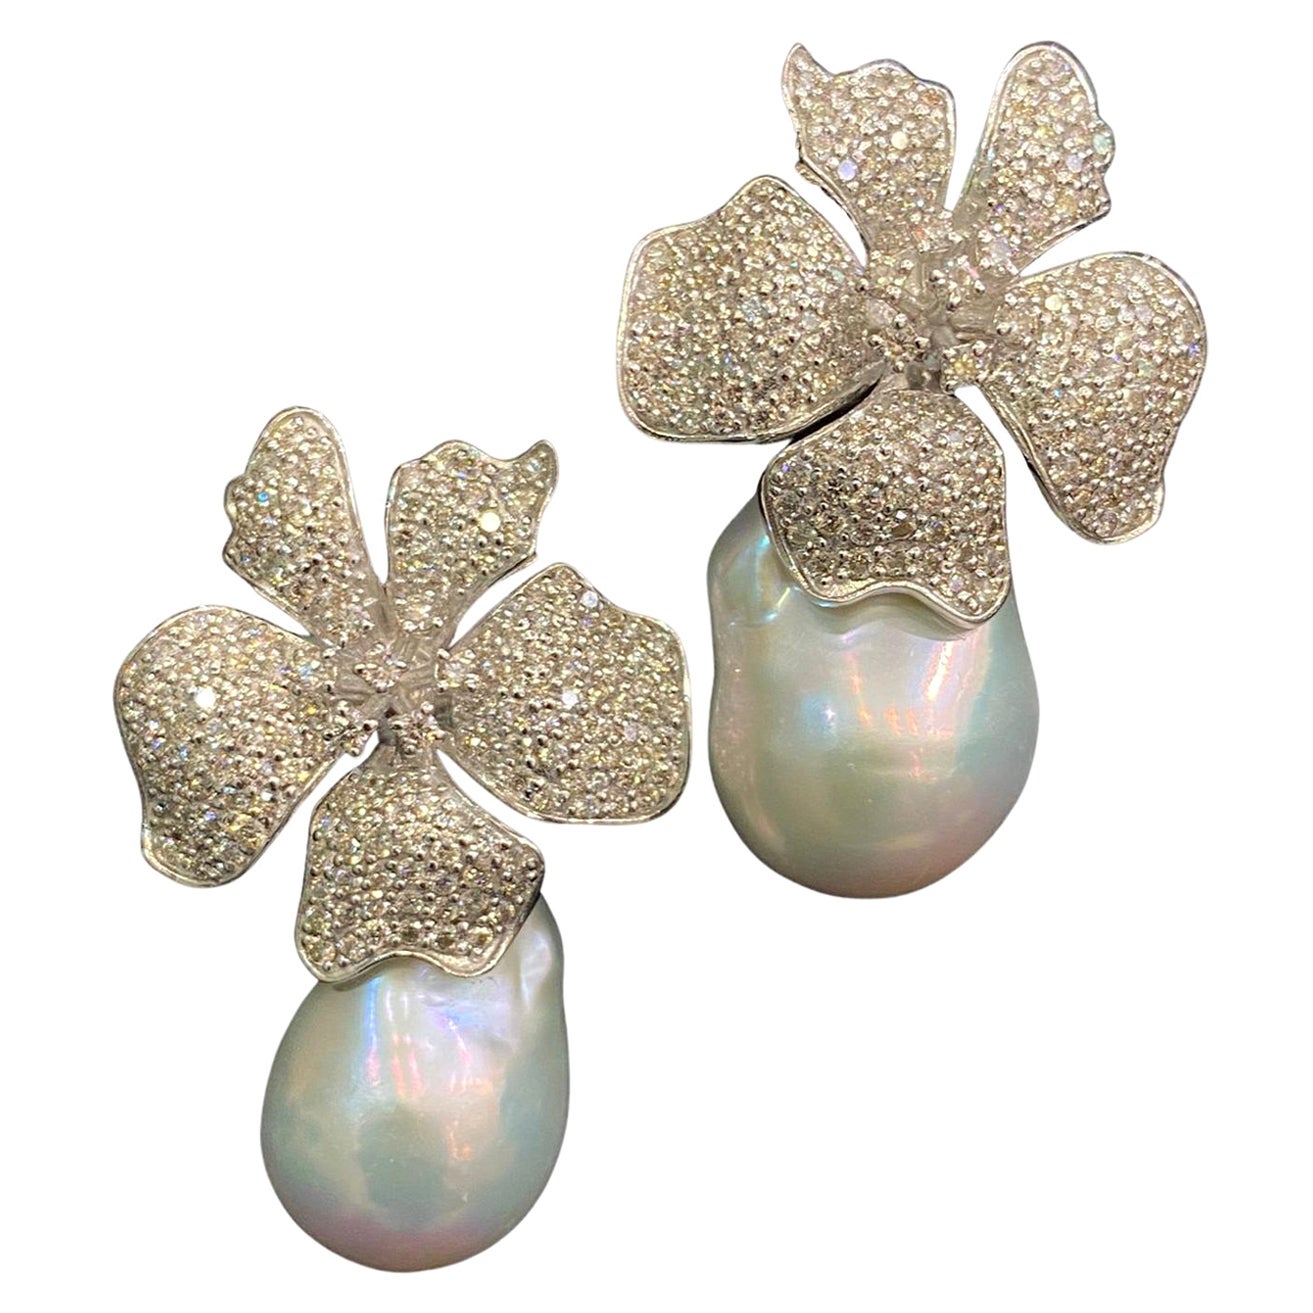 Exquisite Ct 51 of Natural Mother of Pearls and Diamonds on Earrings